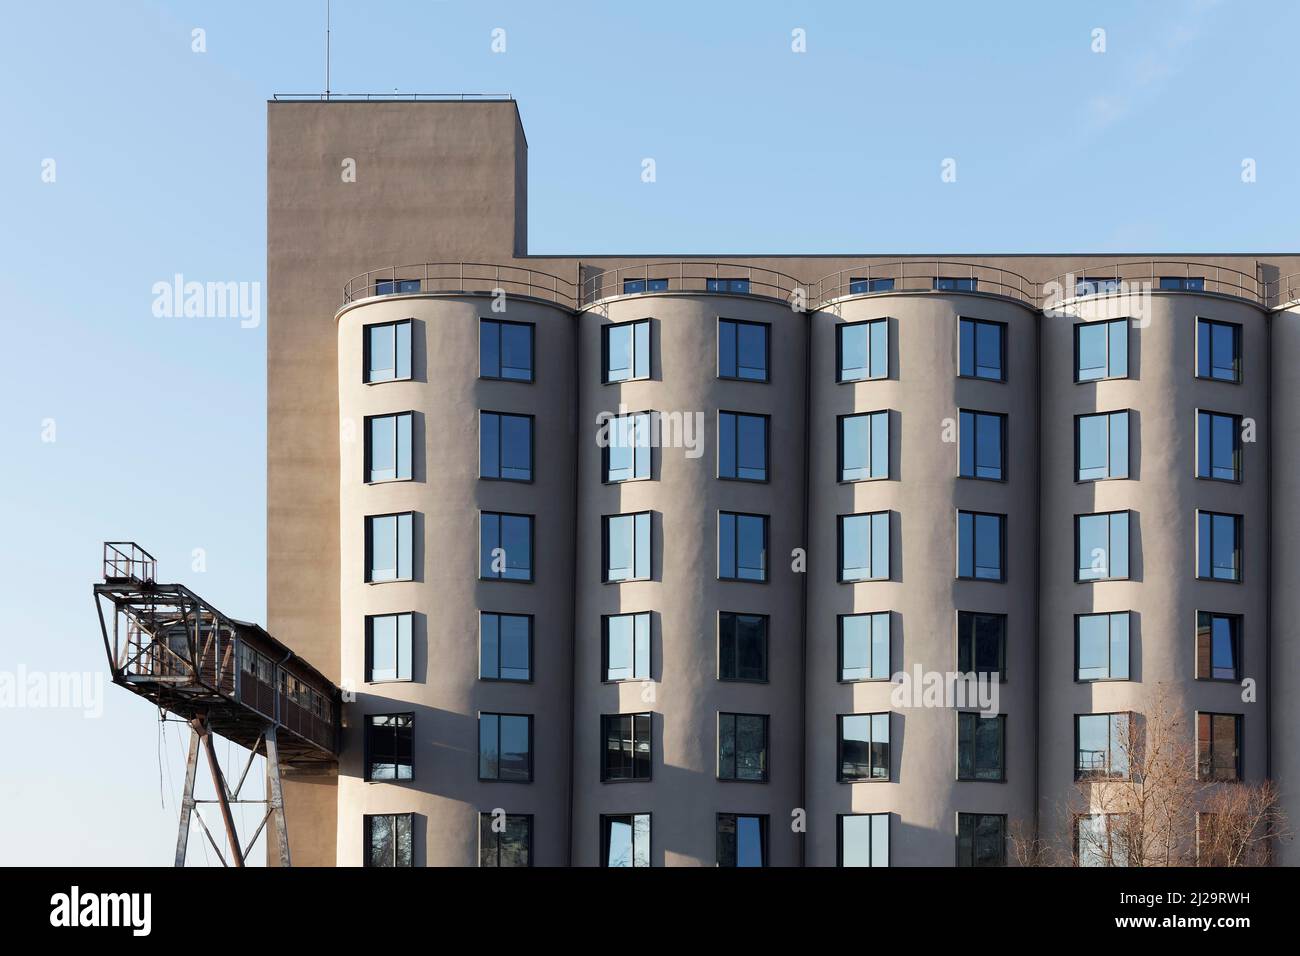 Historic Plange Mill, wheat mill, concrete silos, converted into offices, Duesseldorf Media Harbour, Duesseldorf, North Rhine-Westphalia, Germany Stock Photo